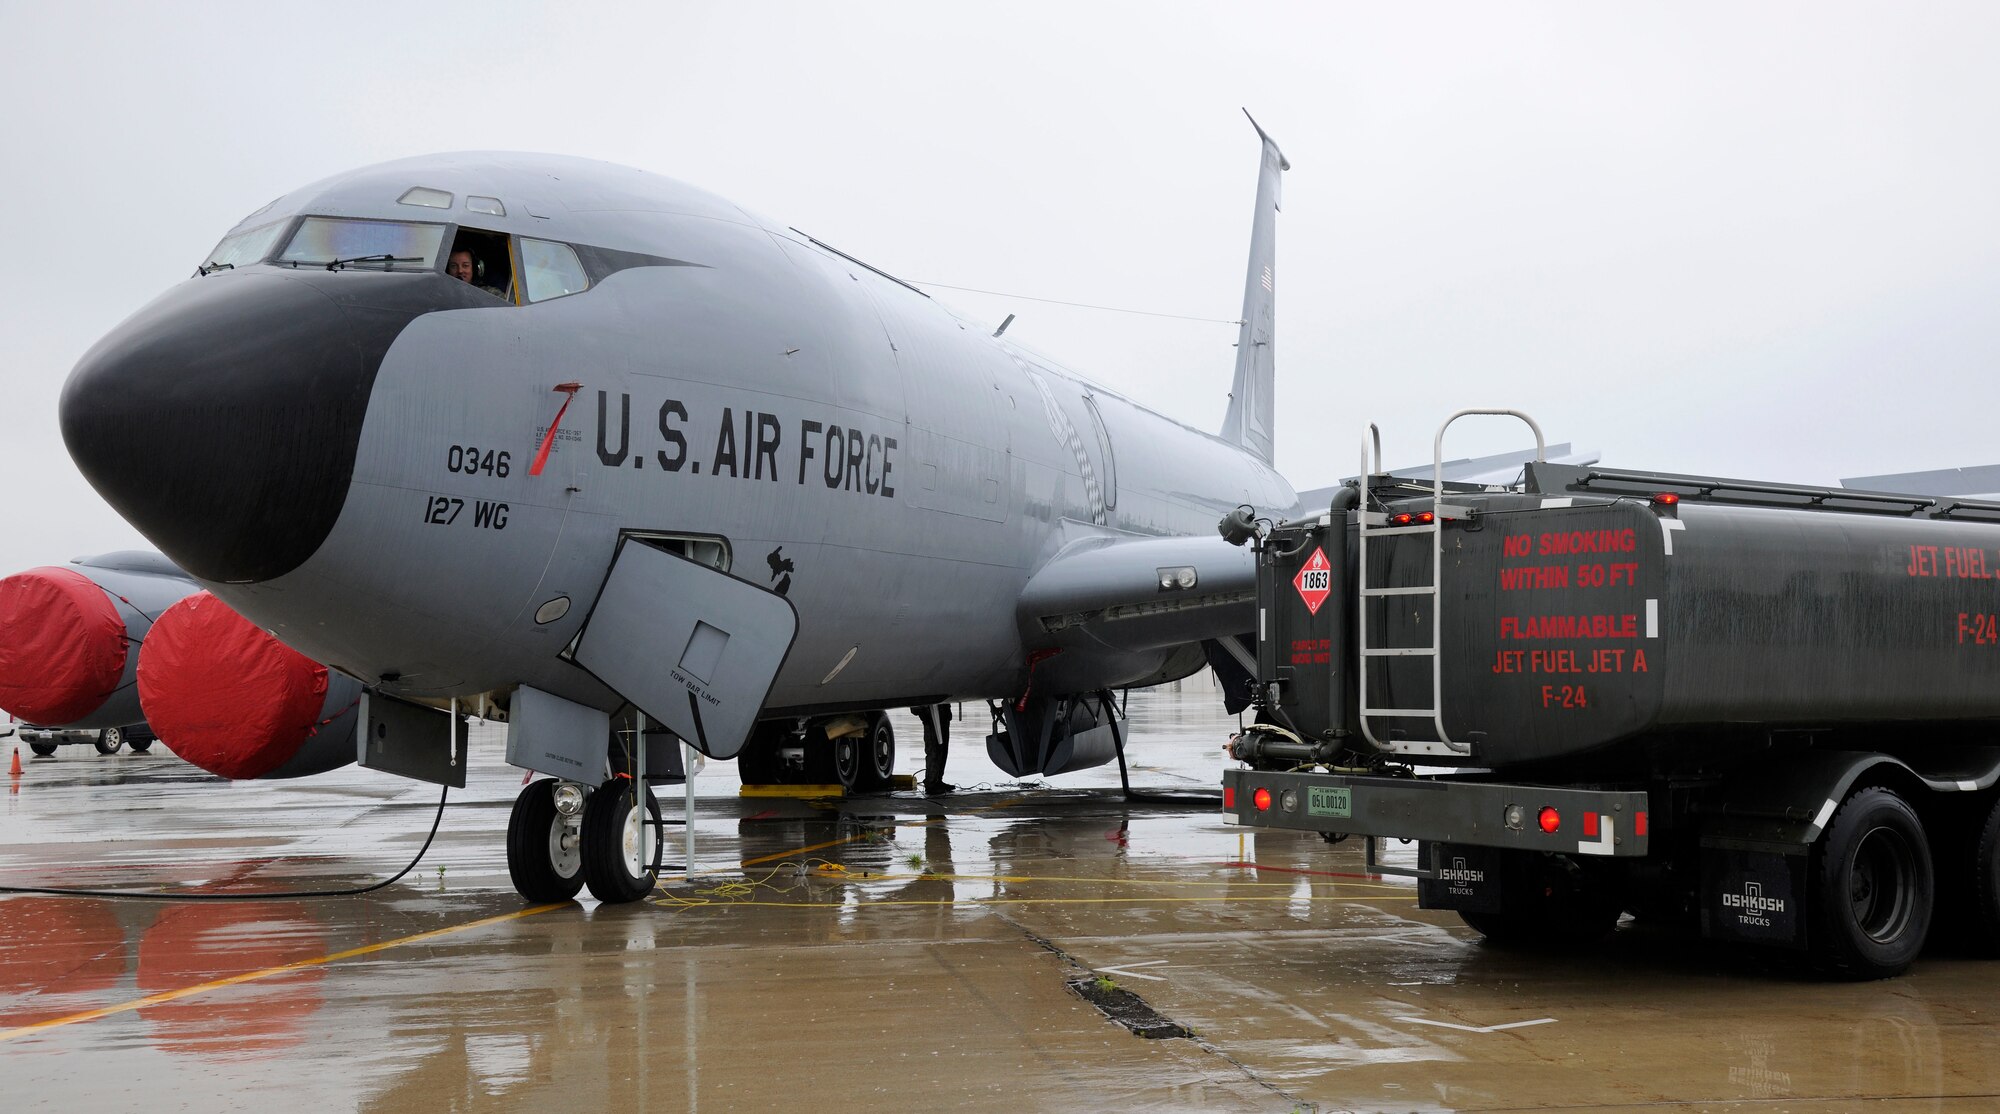 A KC-135 Stratotanker is refueled on the flightline at Selfridge Air National Guard Base, Mich., July 9, 2015. Fully loaded, a KC-135 can hold up to 203,000 pounds of fuel. On a typical, day the average load is around 40,000 pounds or 5,900 gallons of fuel. The amount of fuel a jet receives is dependent on what the mission requires. (U.S. Air National Guard Photo by Senior Airman Ryan Zeski/Released)